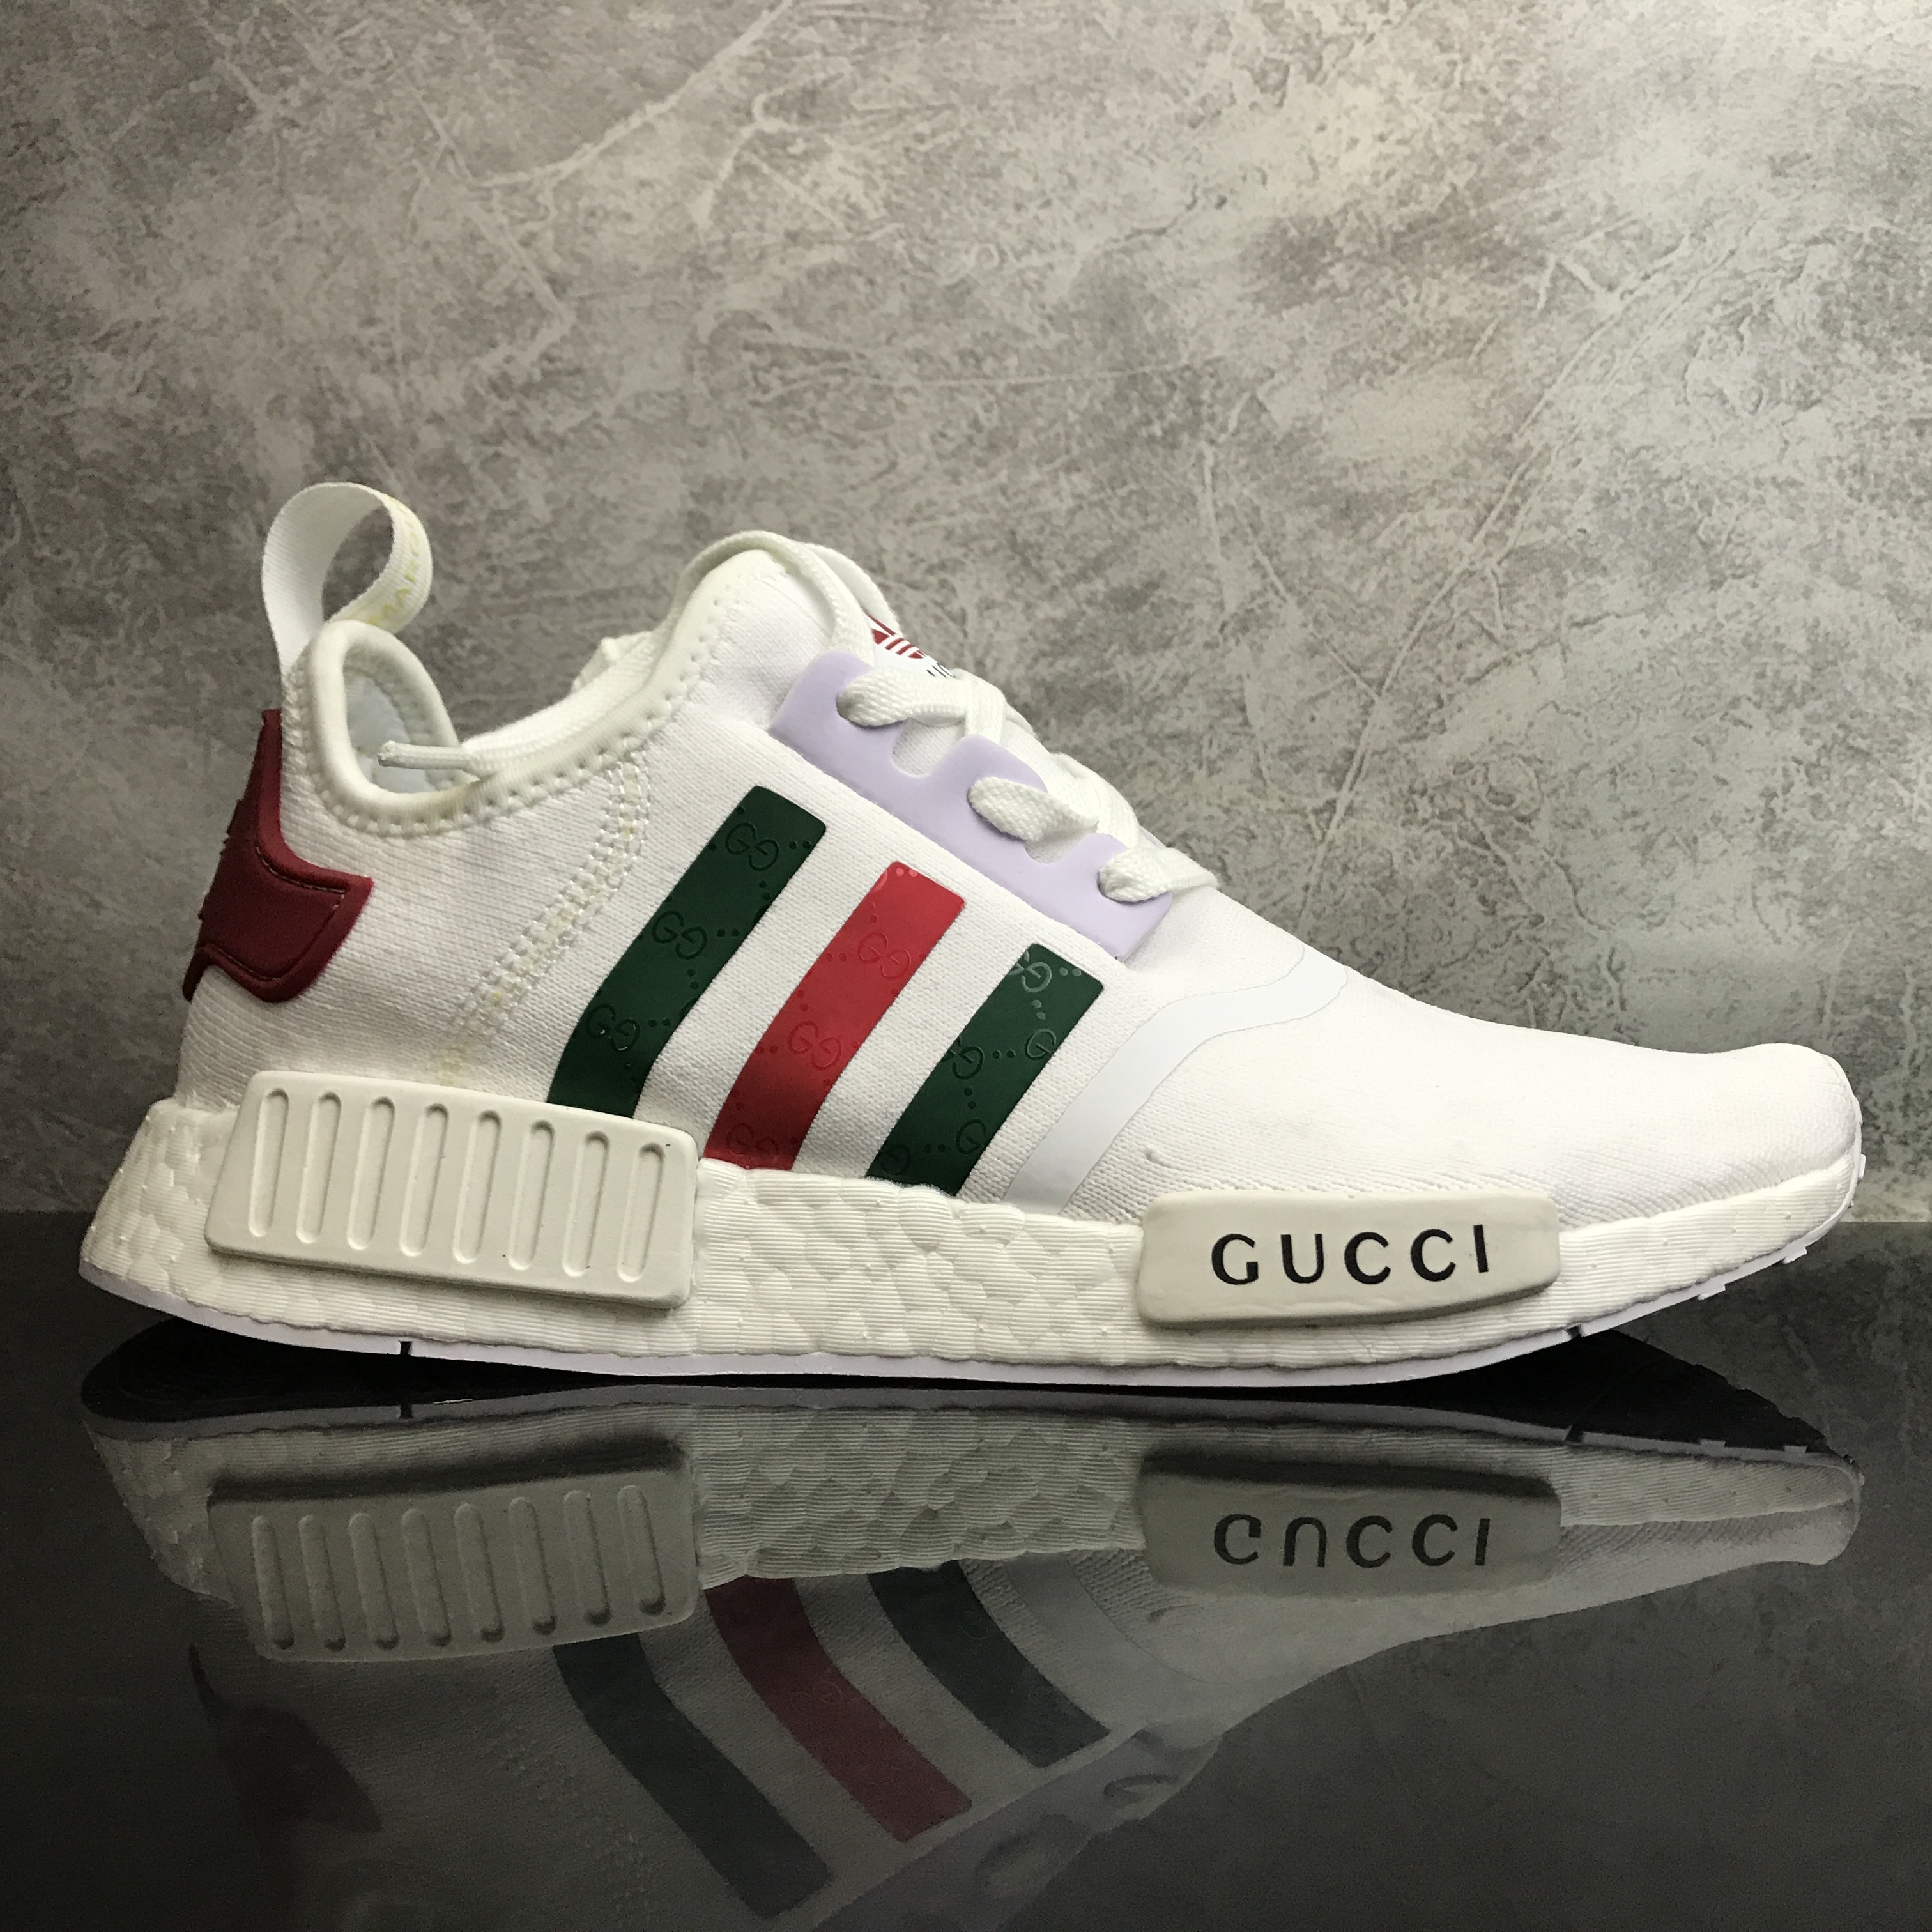 Whats Gucci on Twitter Custom Louis Vuitton x NMD https t co